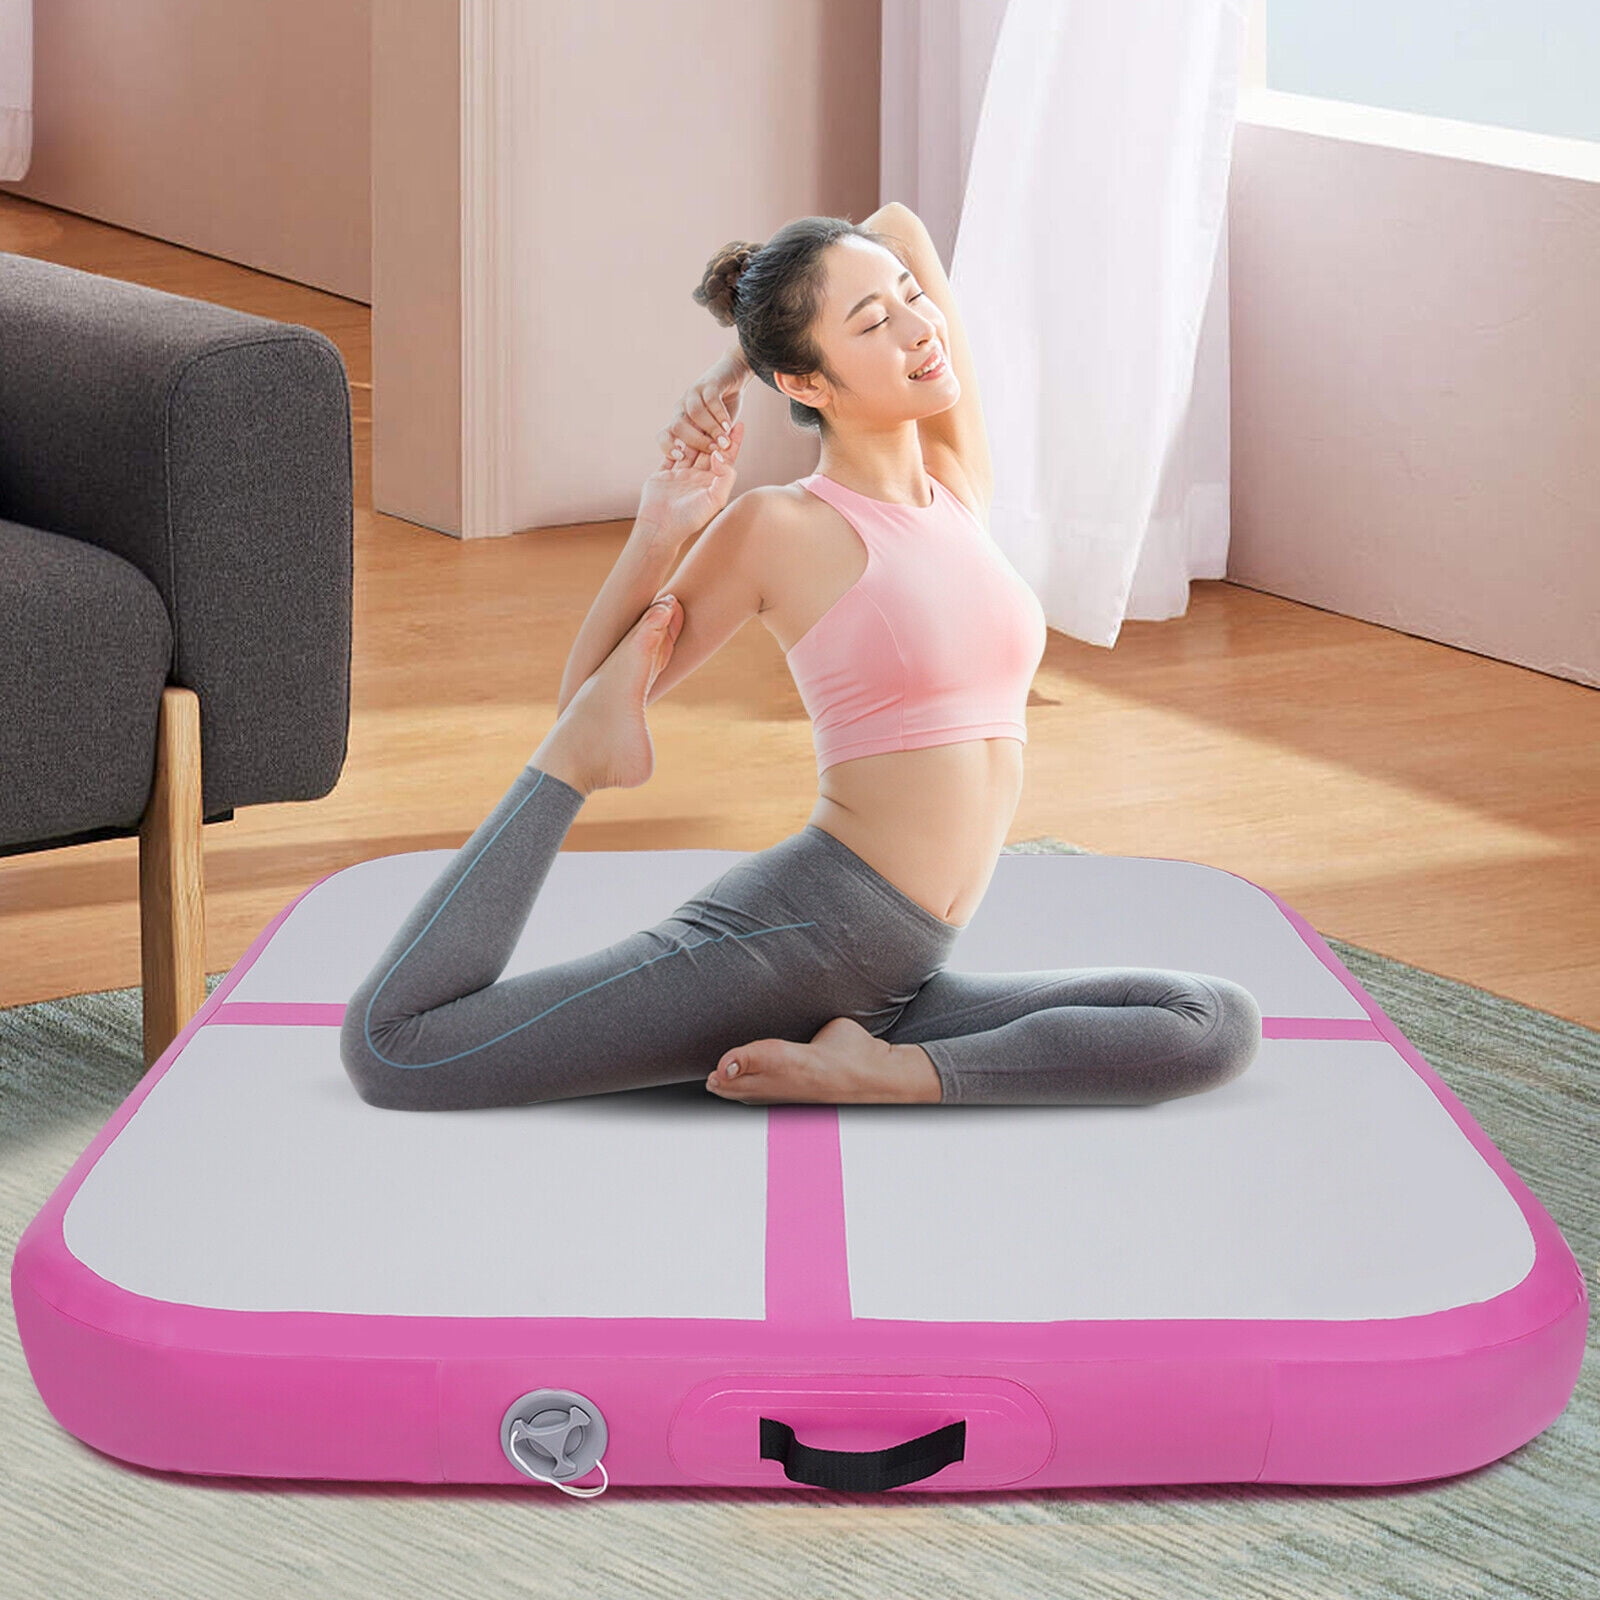 Which gymnastics mat is suitable for you? Inflatable or Foam